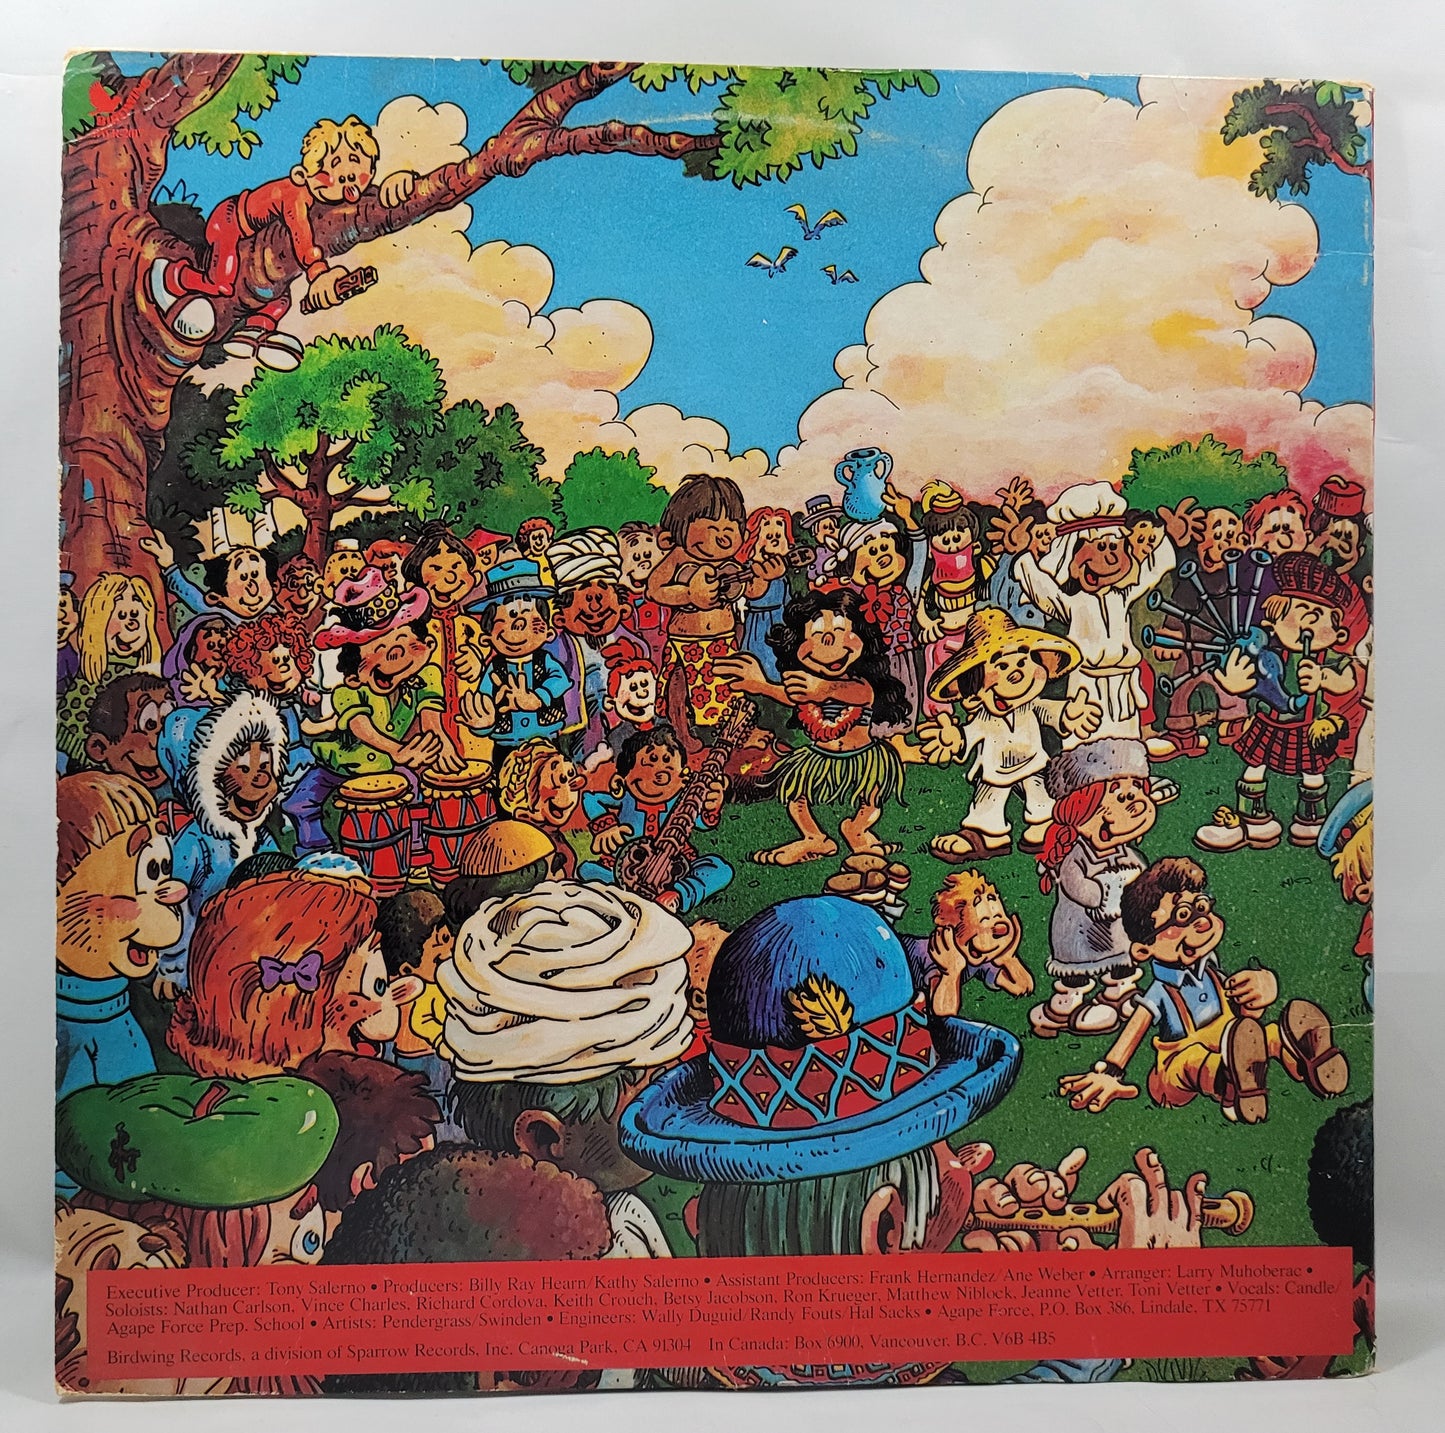 Candle and Agape Force - Sir Oliver's Song: A Musical Adventure Teaching the Principles of the Ten Commandments to All Ages [1979 Used Vinyl Record LP]